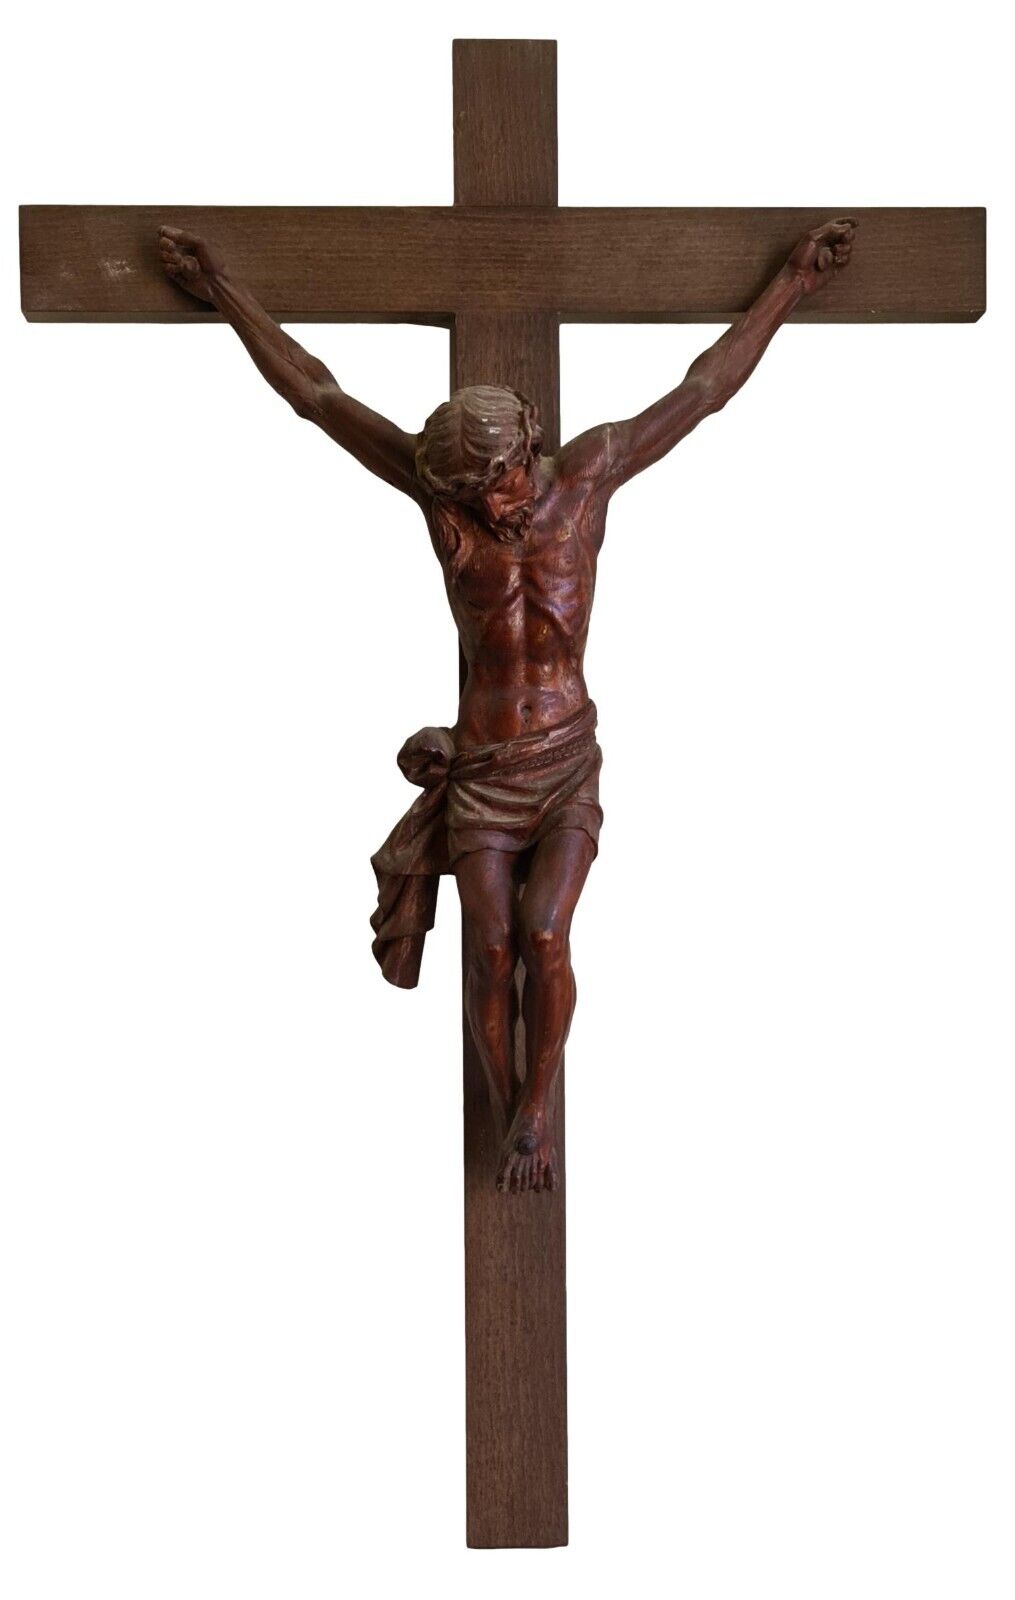 WOODEN CRUCIFIX. CHRIST IN CARVED WOOD. SPAIN. 18TH-19TH CENTURY.